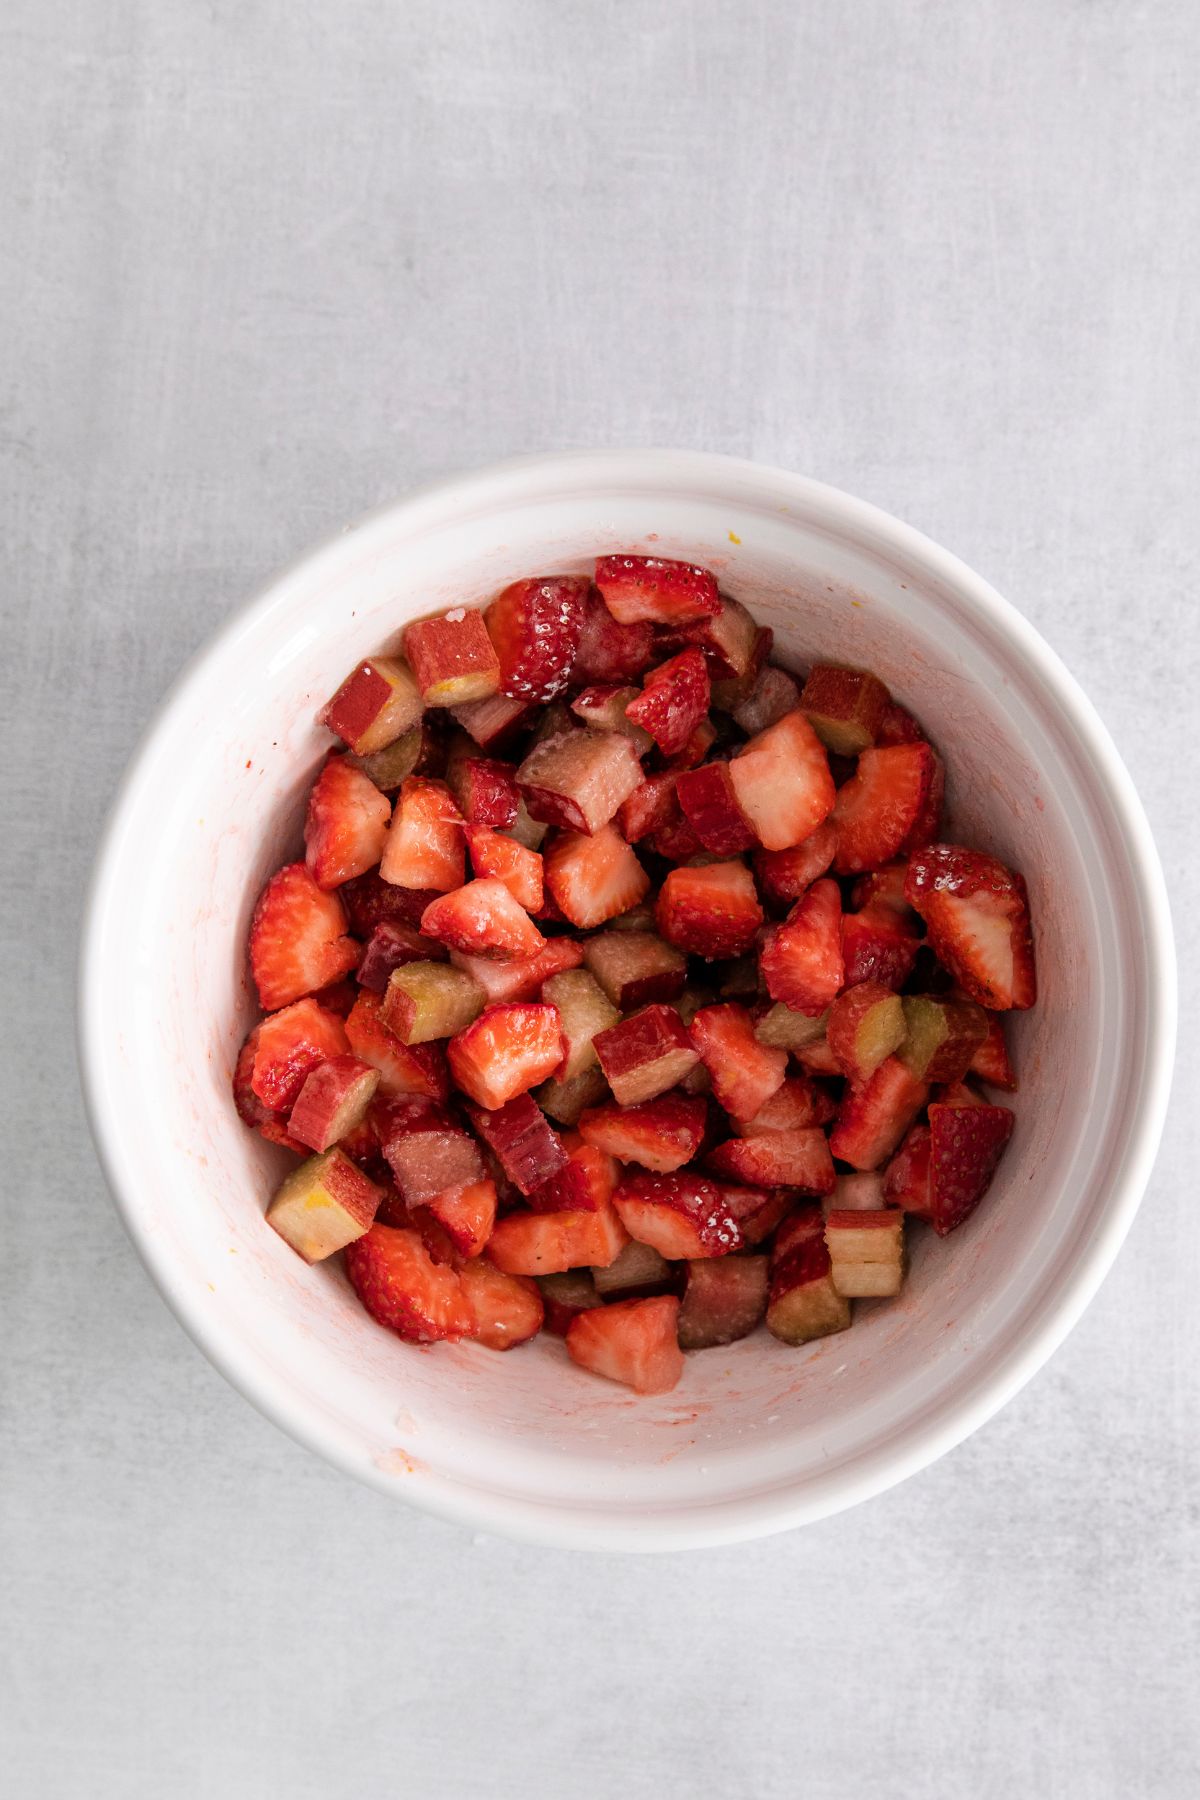 strawberries and rhubarb in white bowl